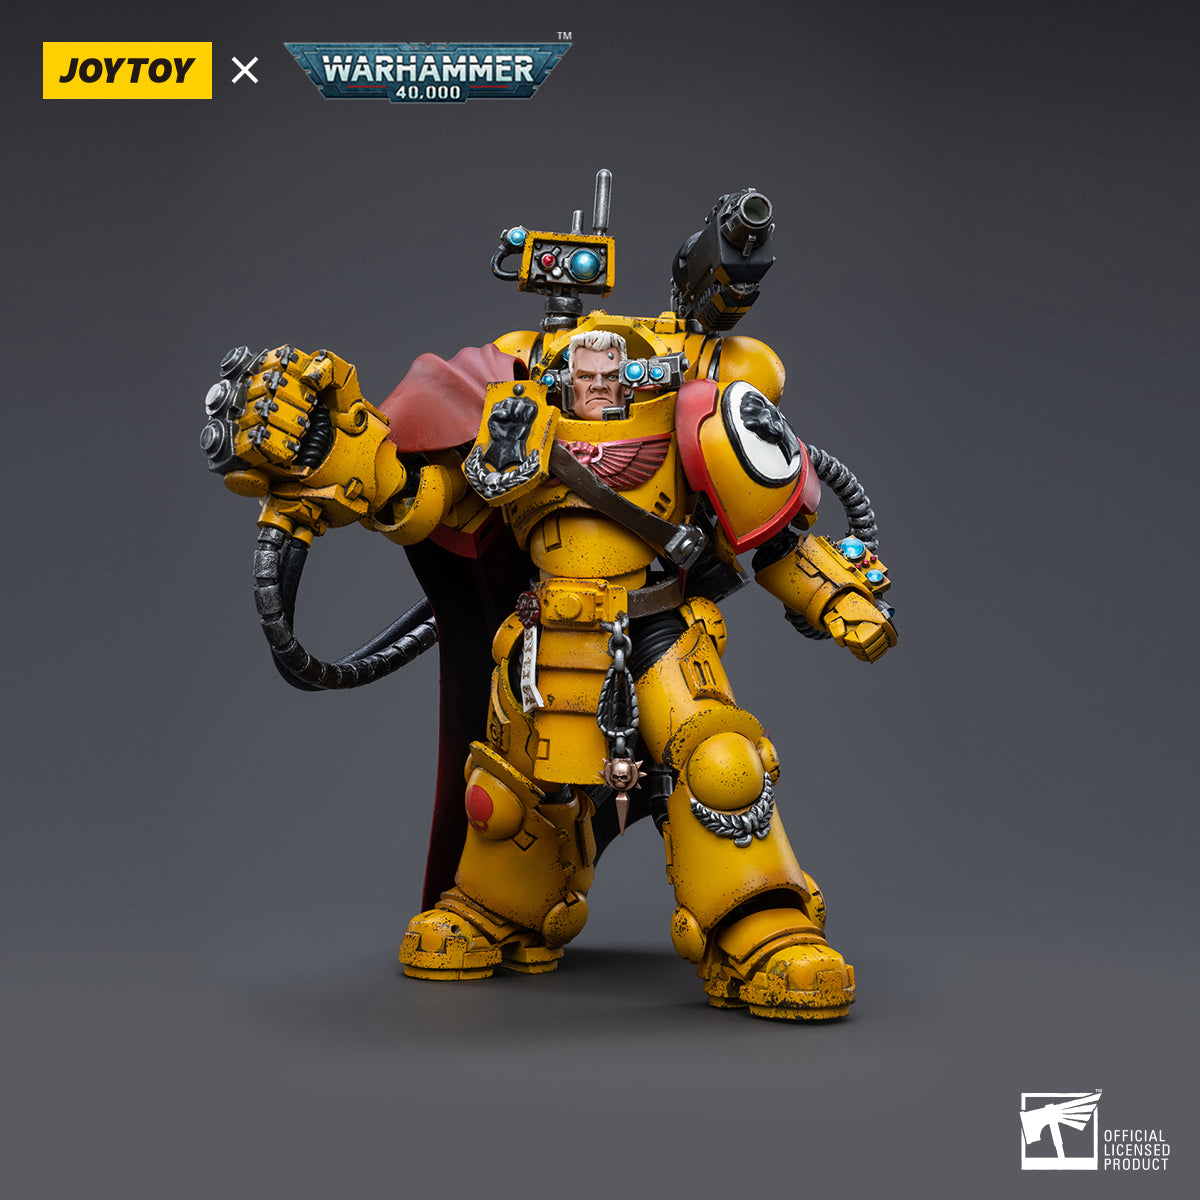 Warhammer Collectibles: 1/18 Scale Imperial Fists Third Captain Tor Garadon